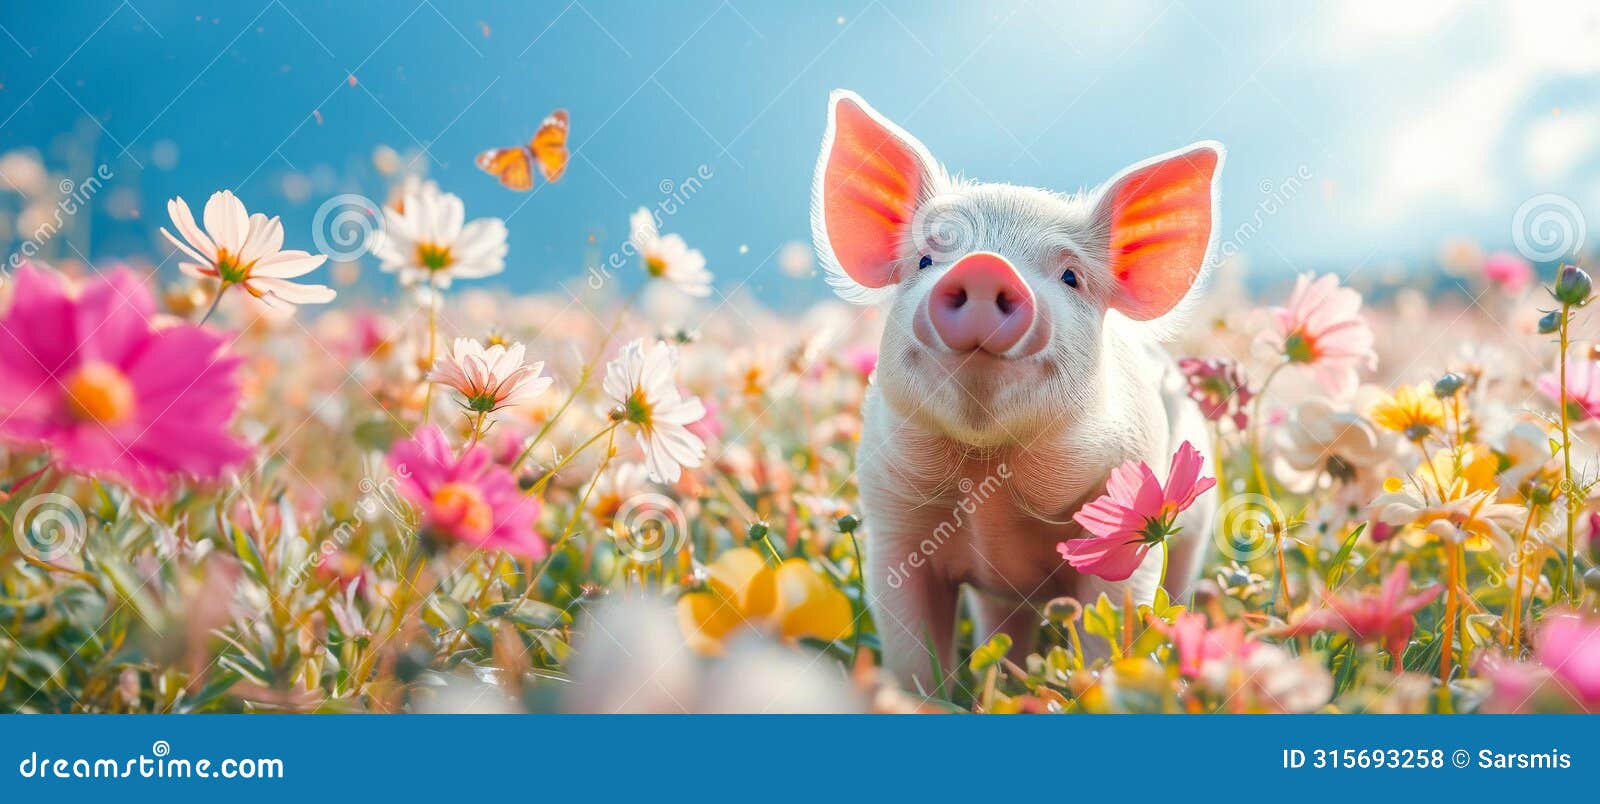 joyful piglet in a blossoming meadow. greeting card for celebrating national pig day